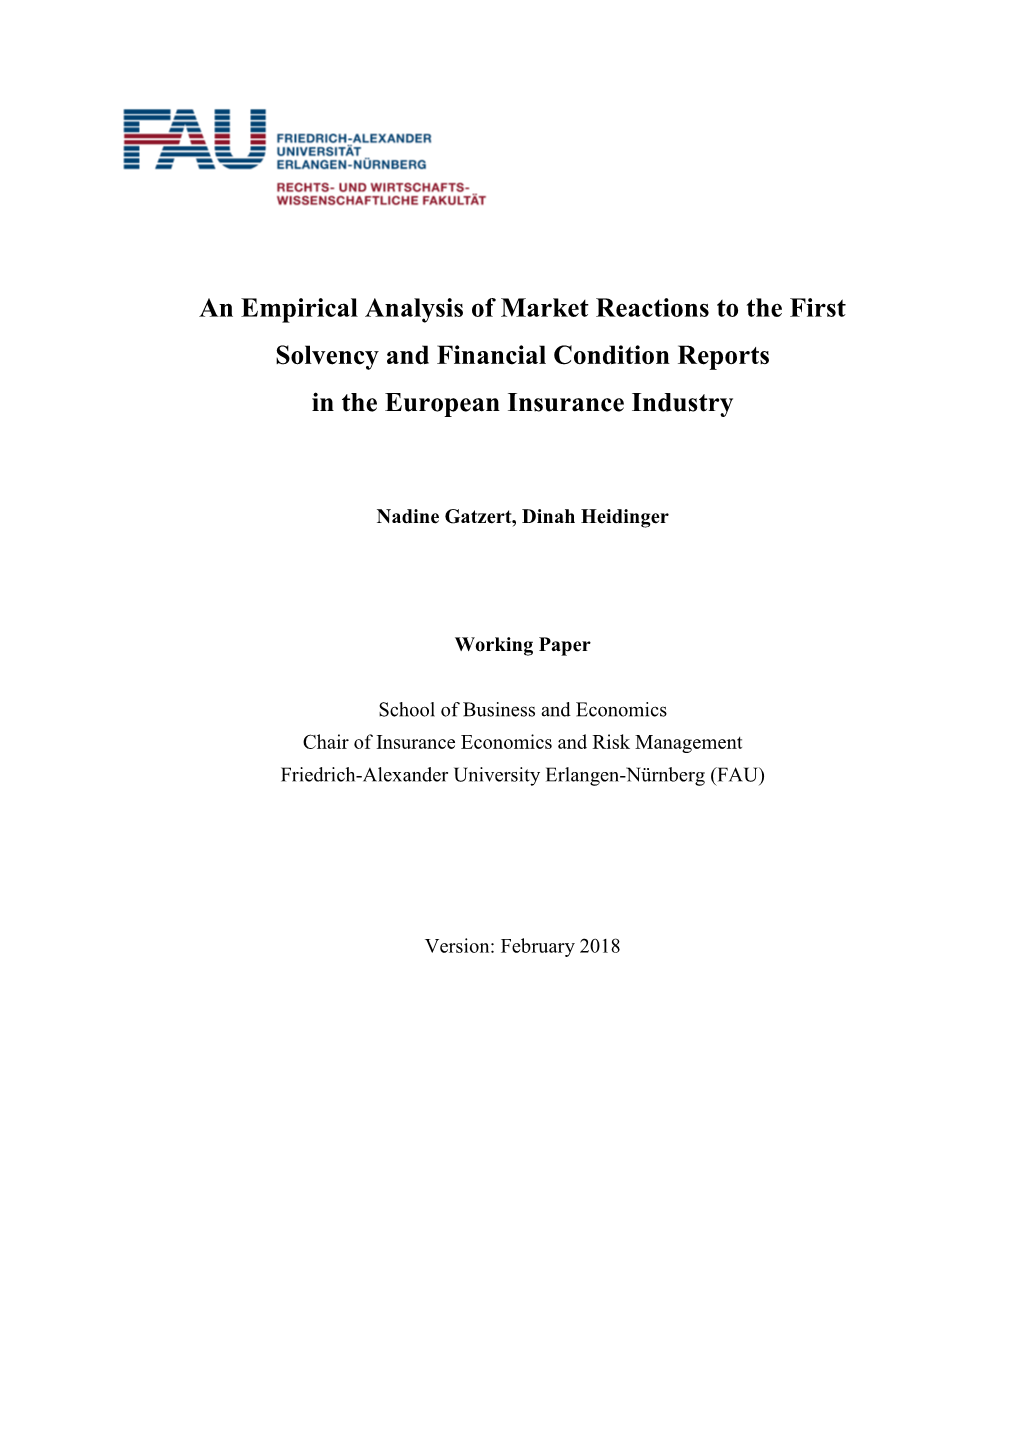 An Empirical Analysis of Market Reactions to the First Solvency and Financial Condition Reports